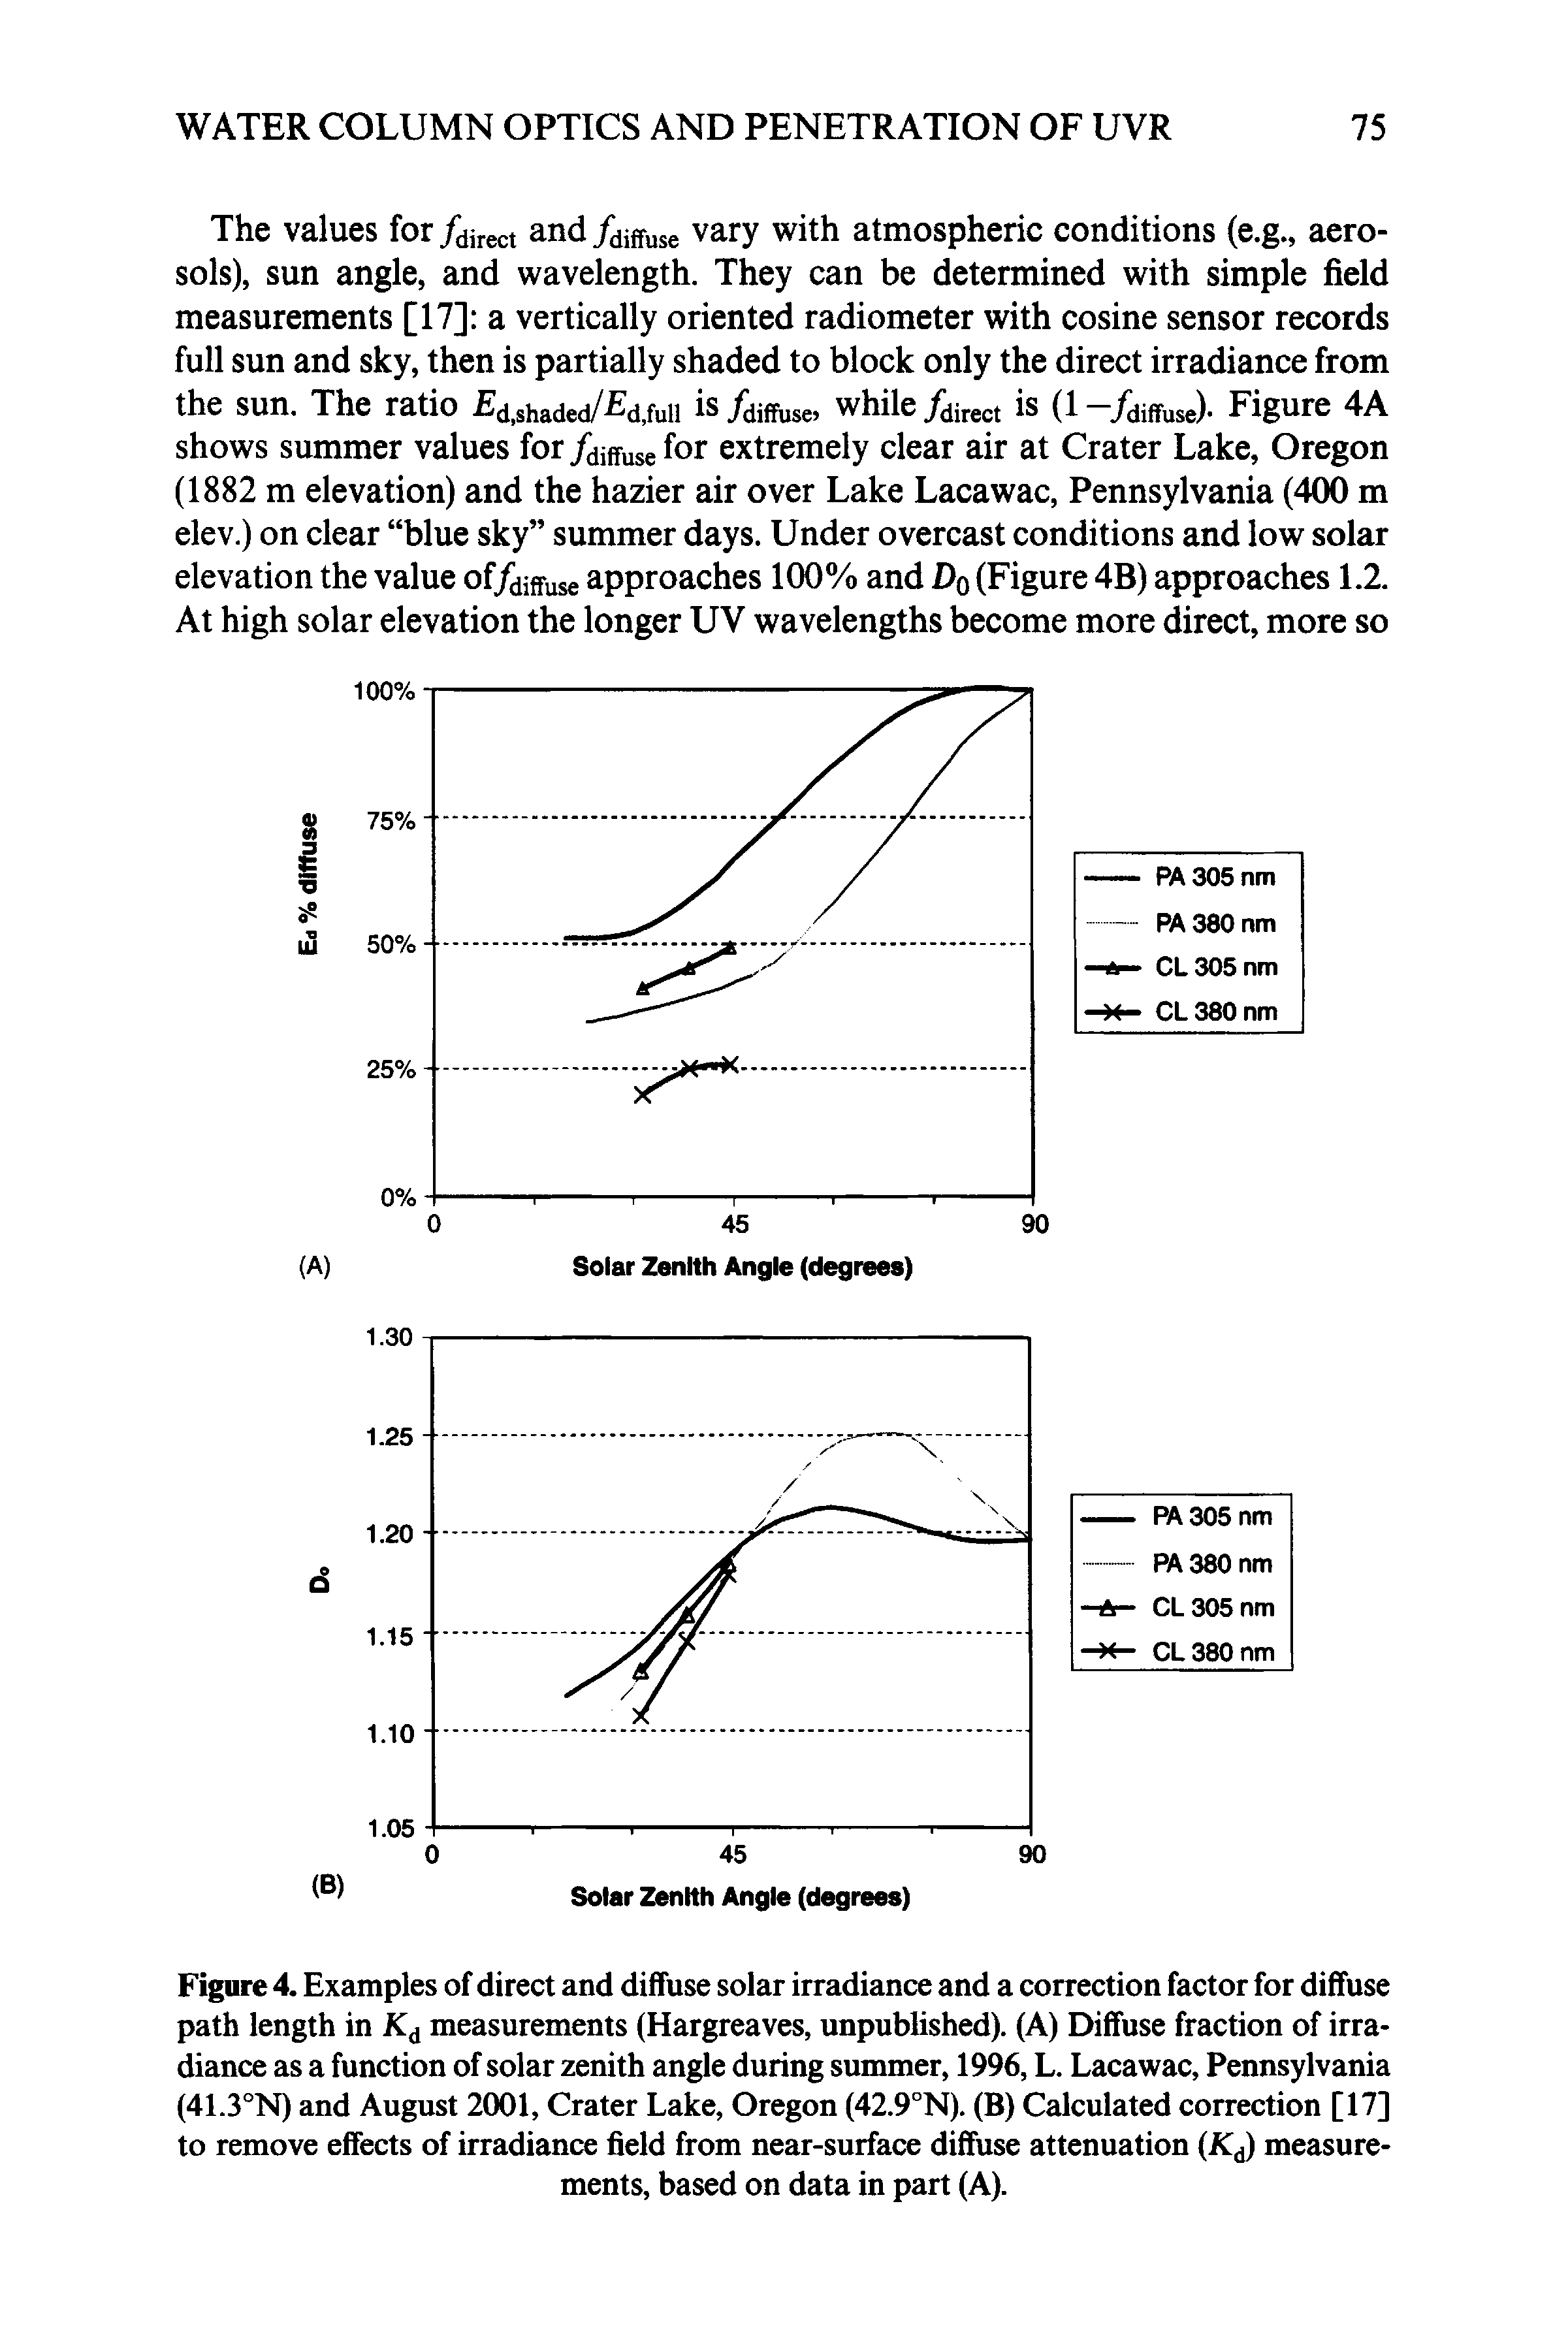 Figure 4. Examples of direct and diffuse solar irradiance and a correction factor for diffuse path length in measurements (Hargreaves, unpublished). (A) Diffuse fraction of irradiance as a function of solar zenith angle during summer, 1996, L. Lacawac, Pennsylvania (41.3°N) and August 2001, Crater Lake, Oregon (42.9°N). (B) Calculated correction [17] to remove effects of irradiance field from near-surface diffuse attenuation (K ) measurements, based on data in part (A).